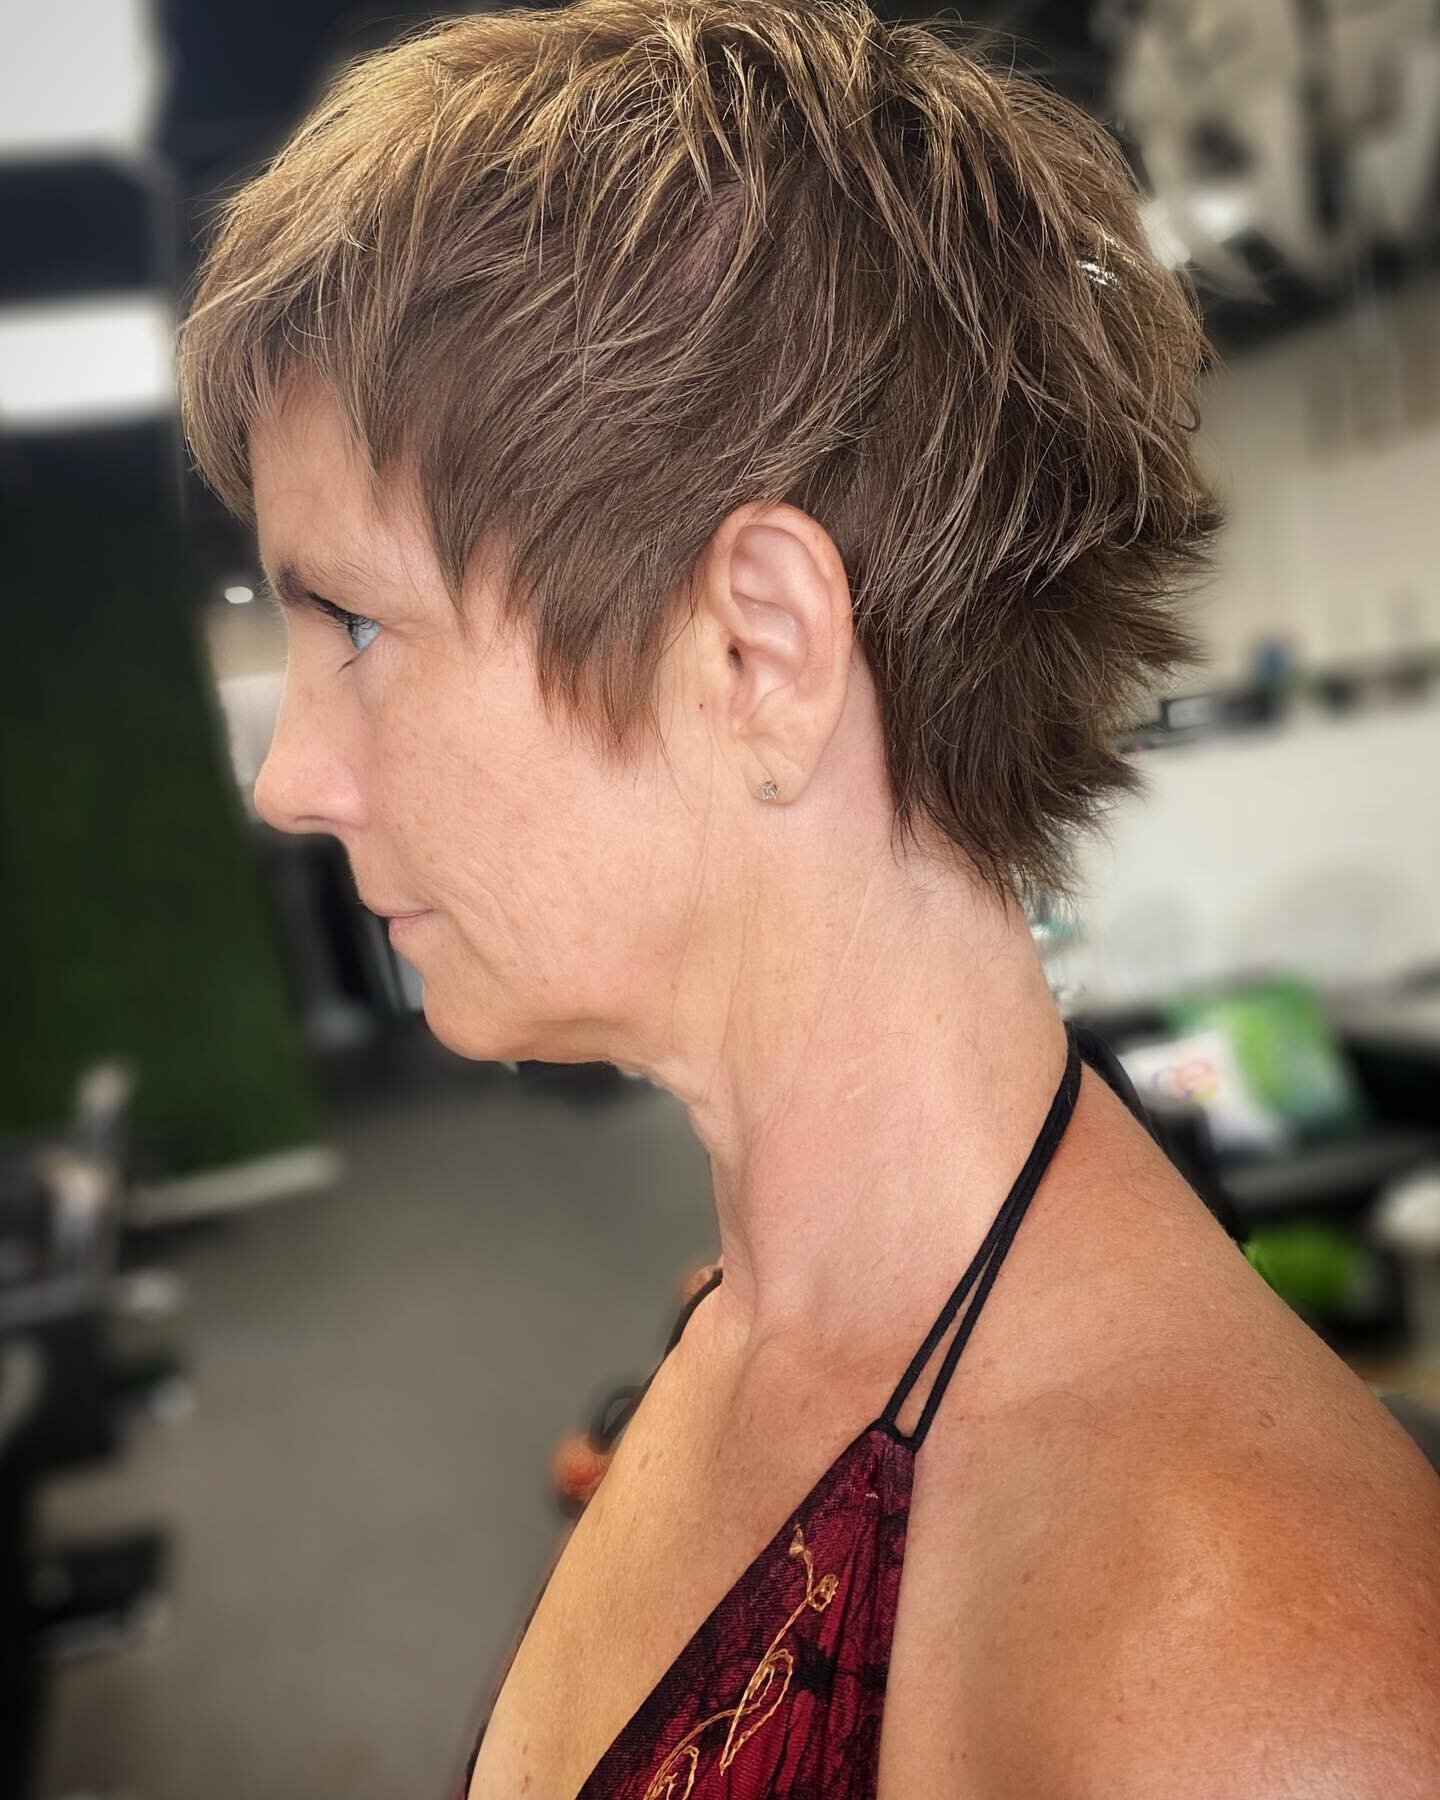 Taking it back with this cut but @hair_byginama still put her spin on it😉This just shows proof that any style can be made modern

#sanantoniohairstylist #sanantonioshorthairspecialist #sanantoniohair #sanantoniosalon #shorthairlife #shorthair #goldw